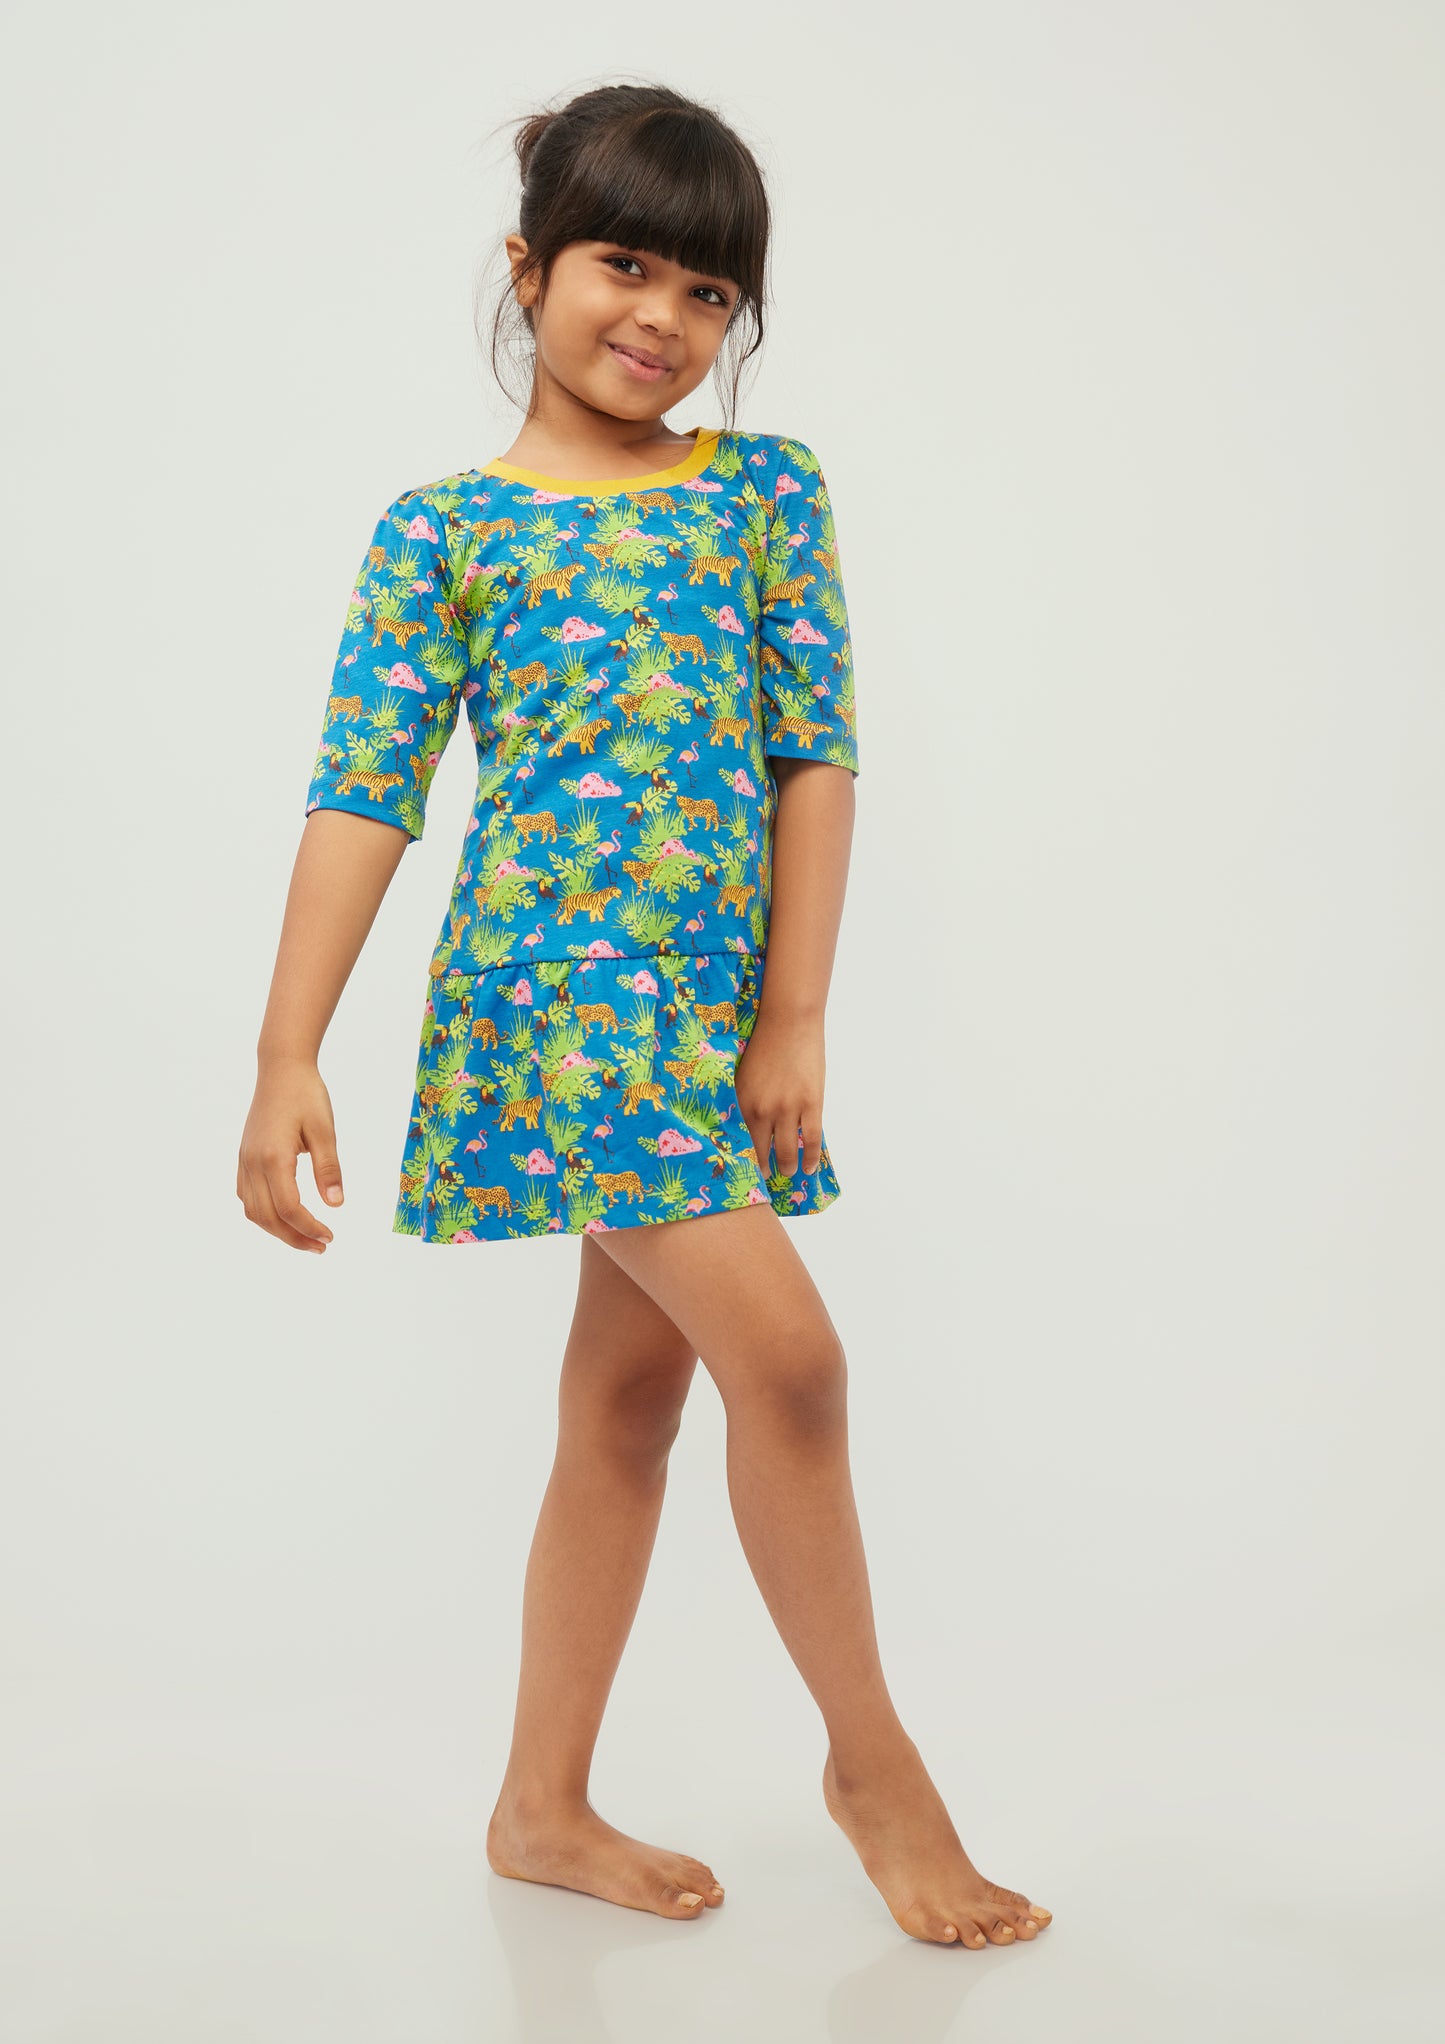 BLUE, YELLOW AND GREEN SAFARI PRINT FIT AND FLARED DRESS